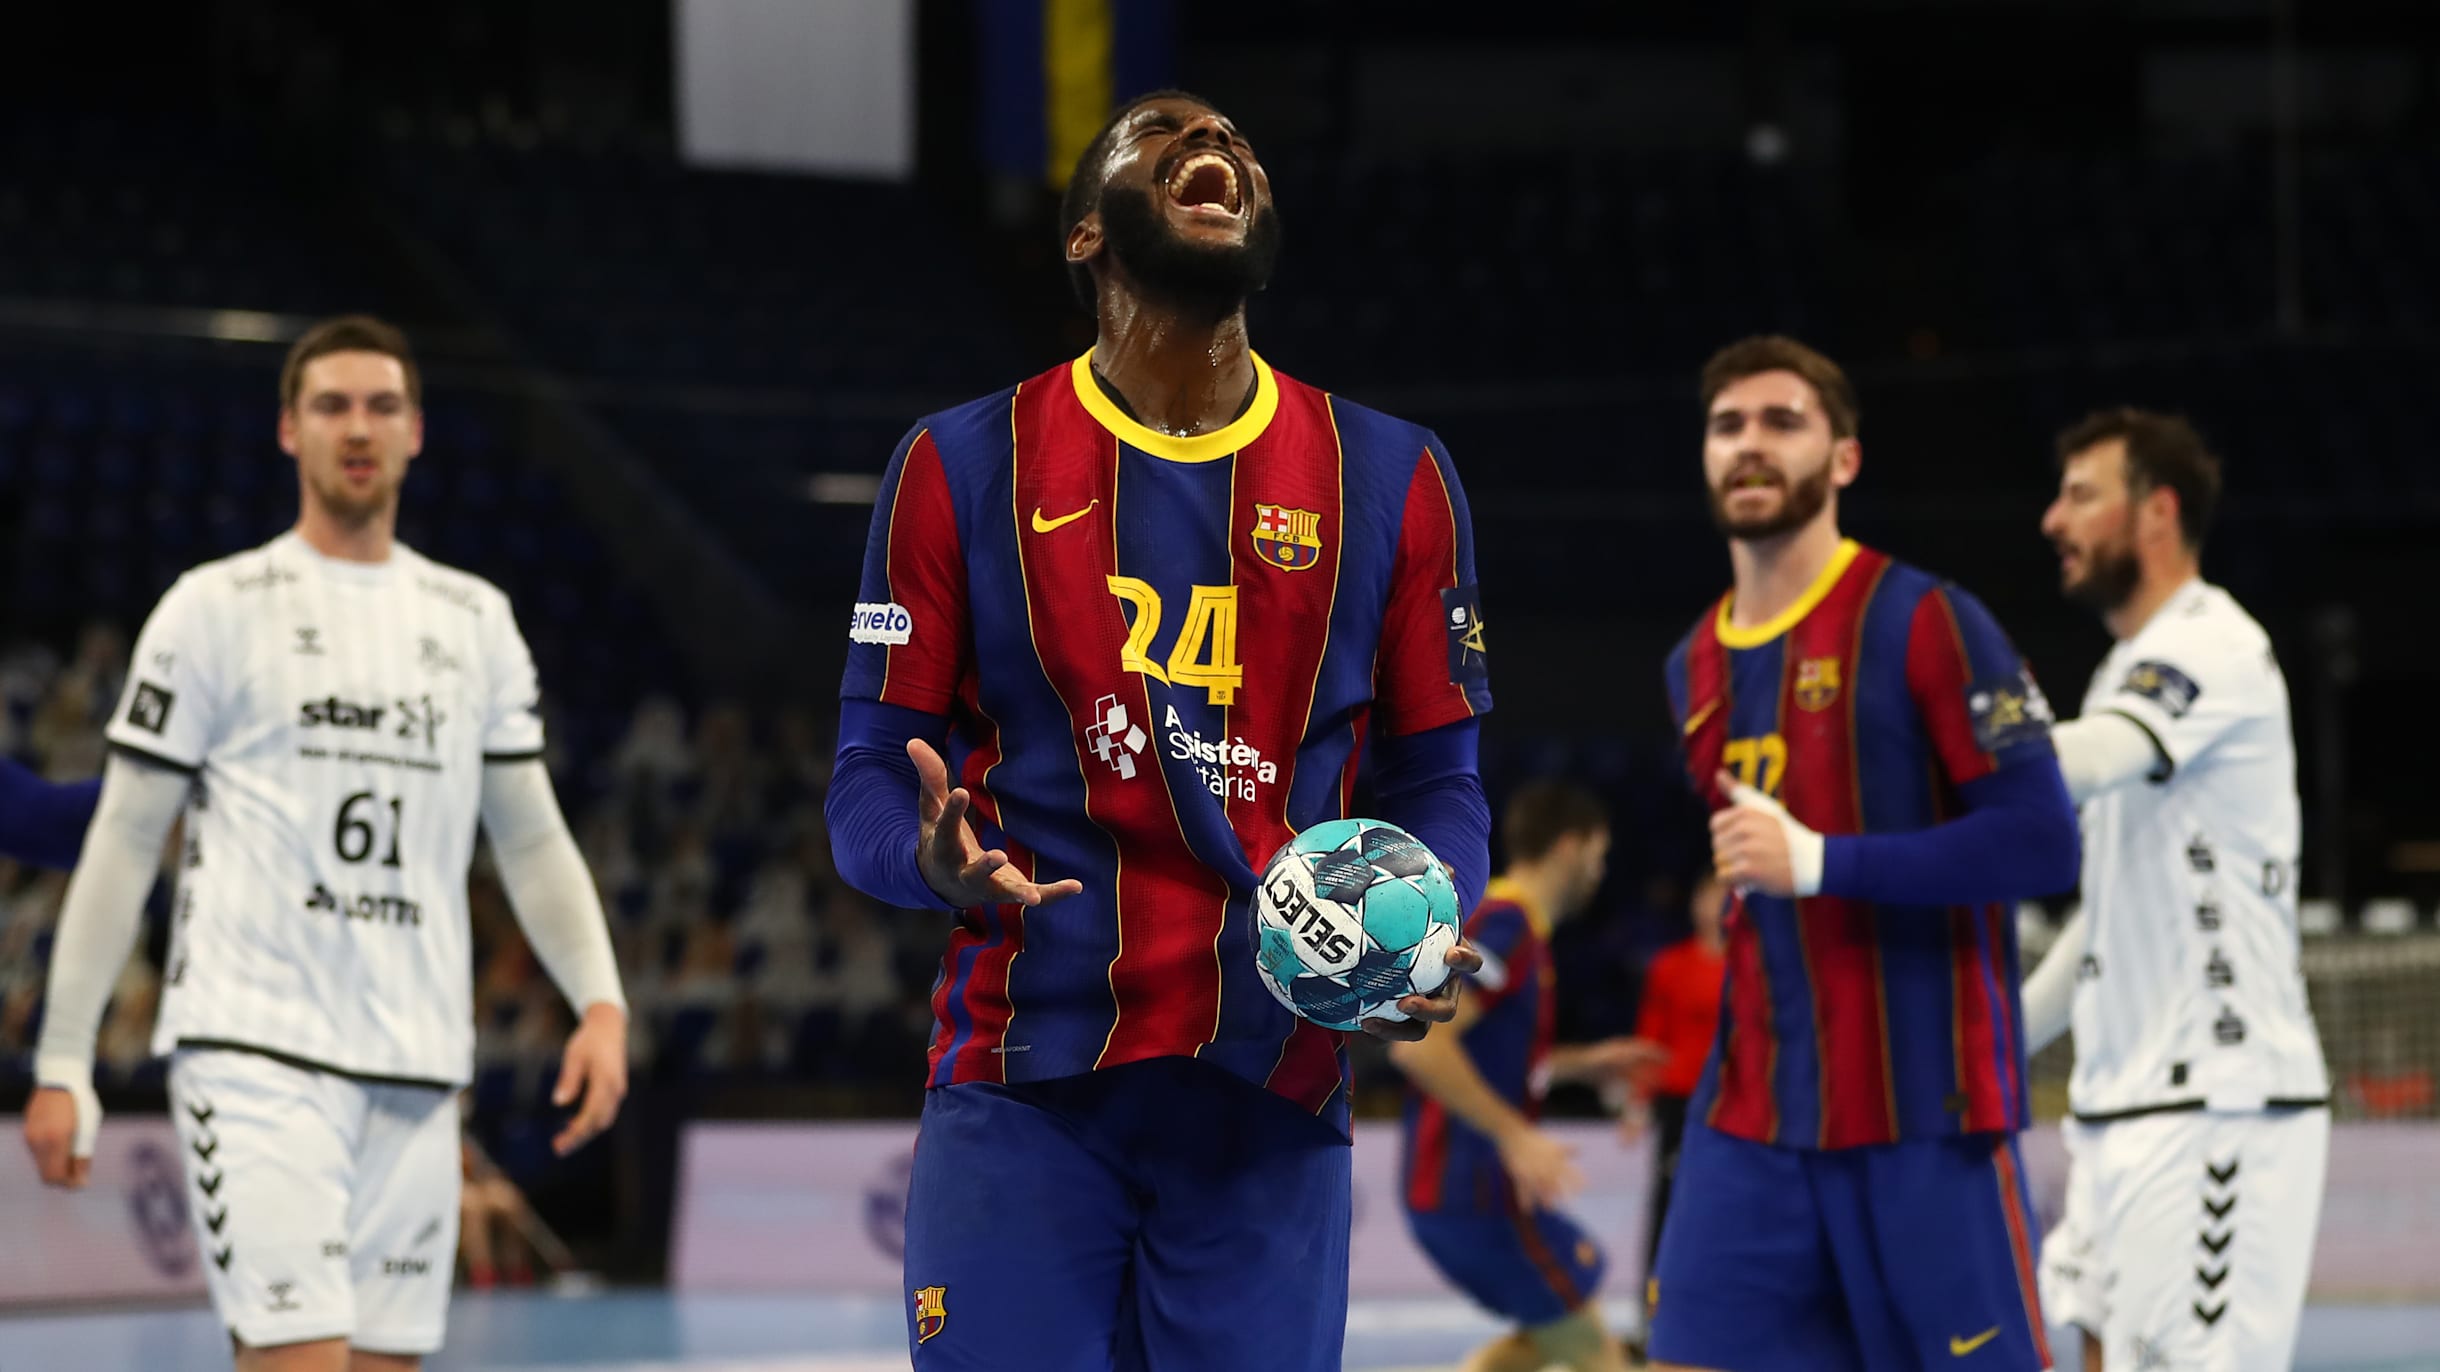 EHF Champions League FINAL4 Preview, Schedule, TV and live streaming